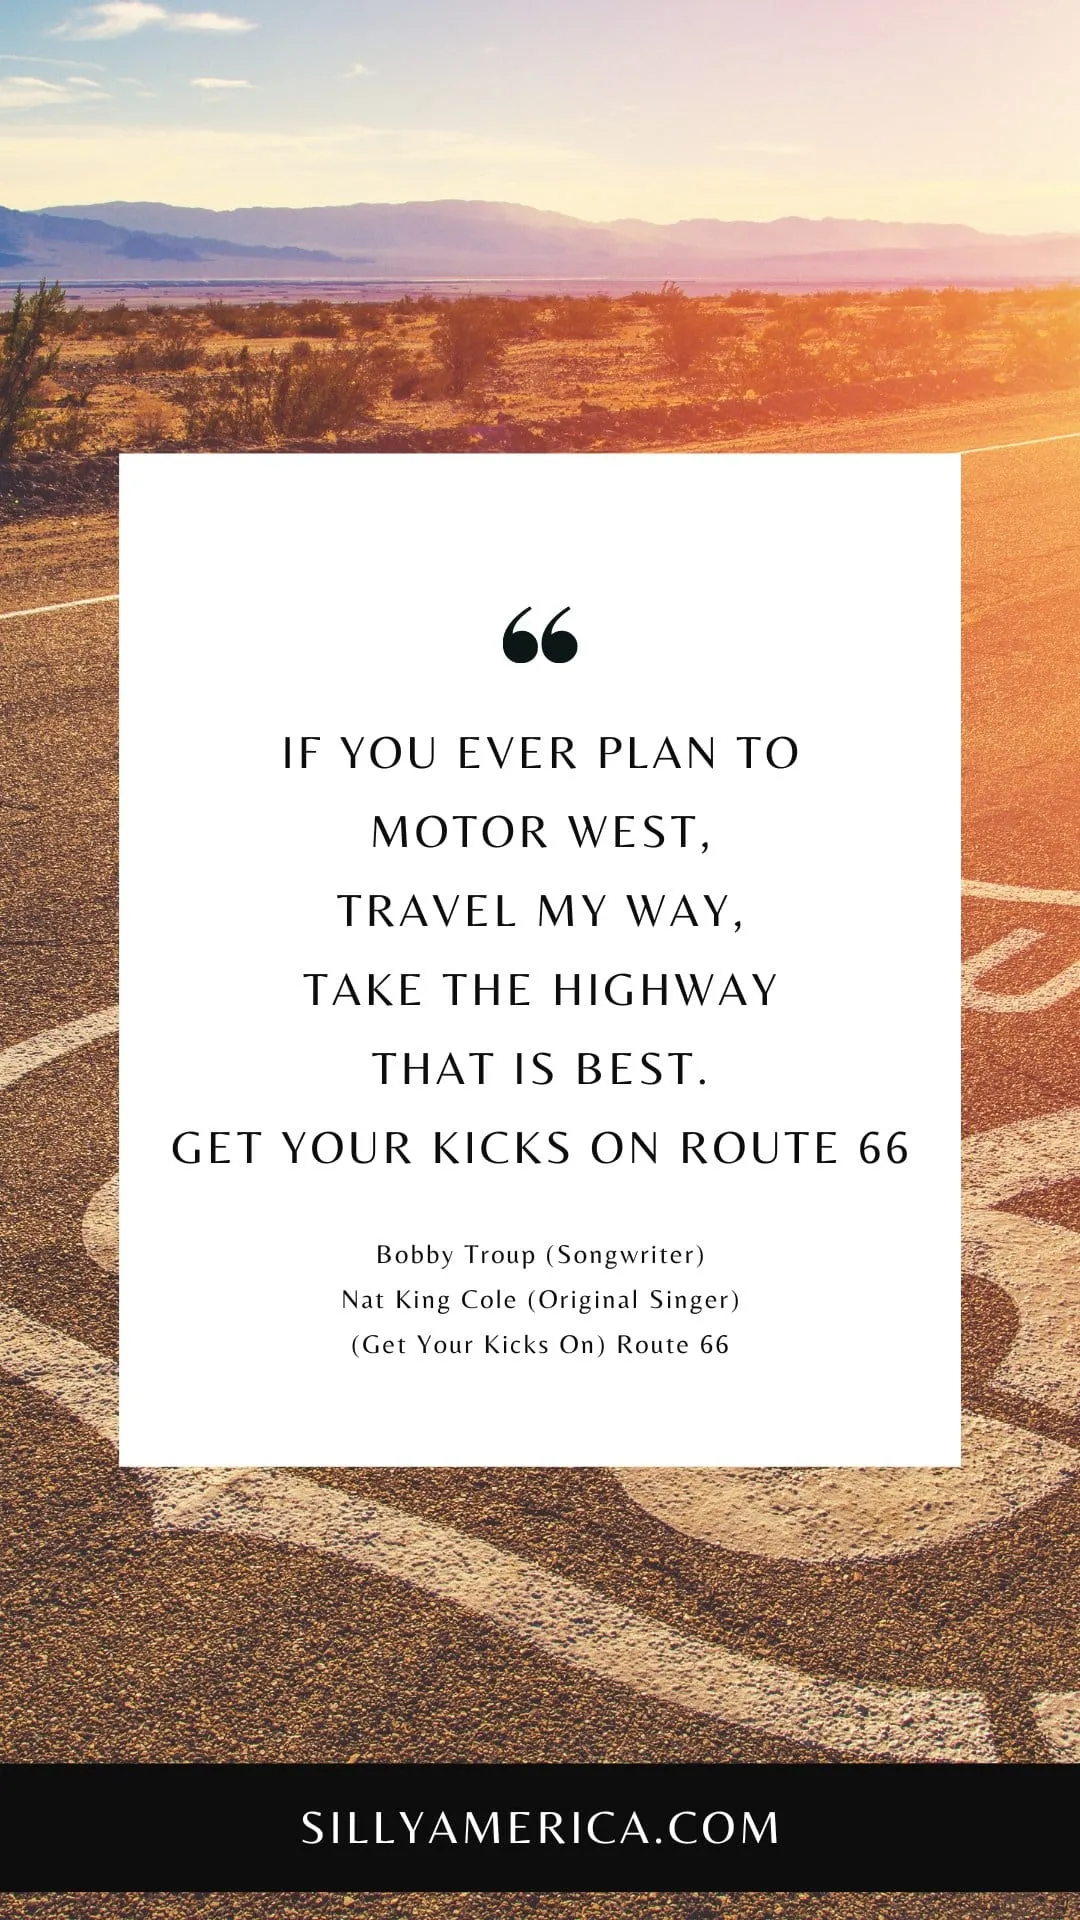 Route 66 Quotes, Sayings, and Phrases - If you ever plan to motor west, Travel my way, take the highway that is best. Get your kicks on Route Sixty-Six. - Bobby Troup (Songwriter), Nat King Cole (Original Singer), "(Get Your Kicks On) Route 66"